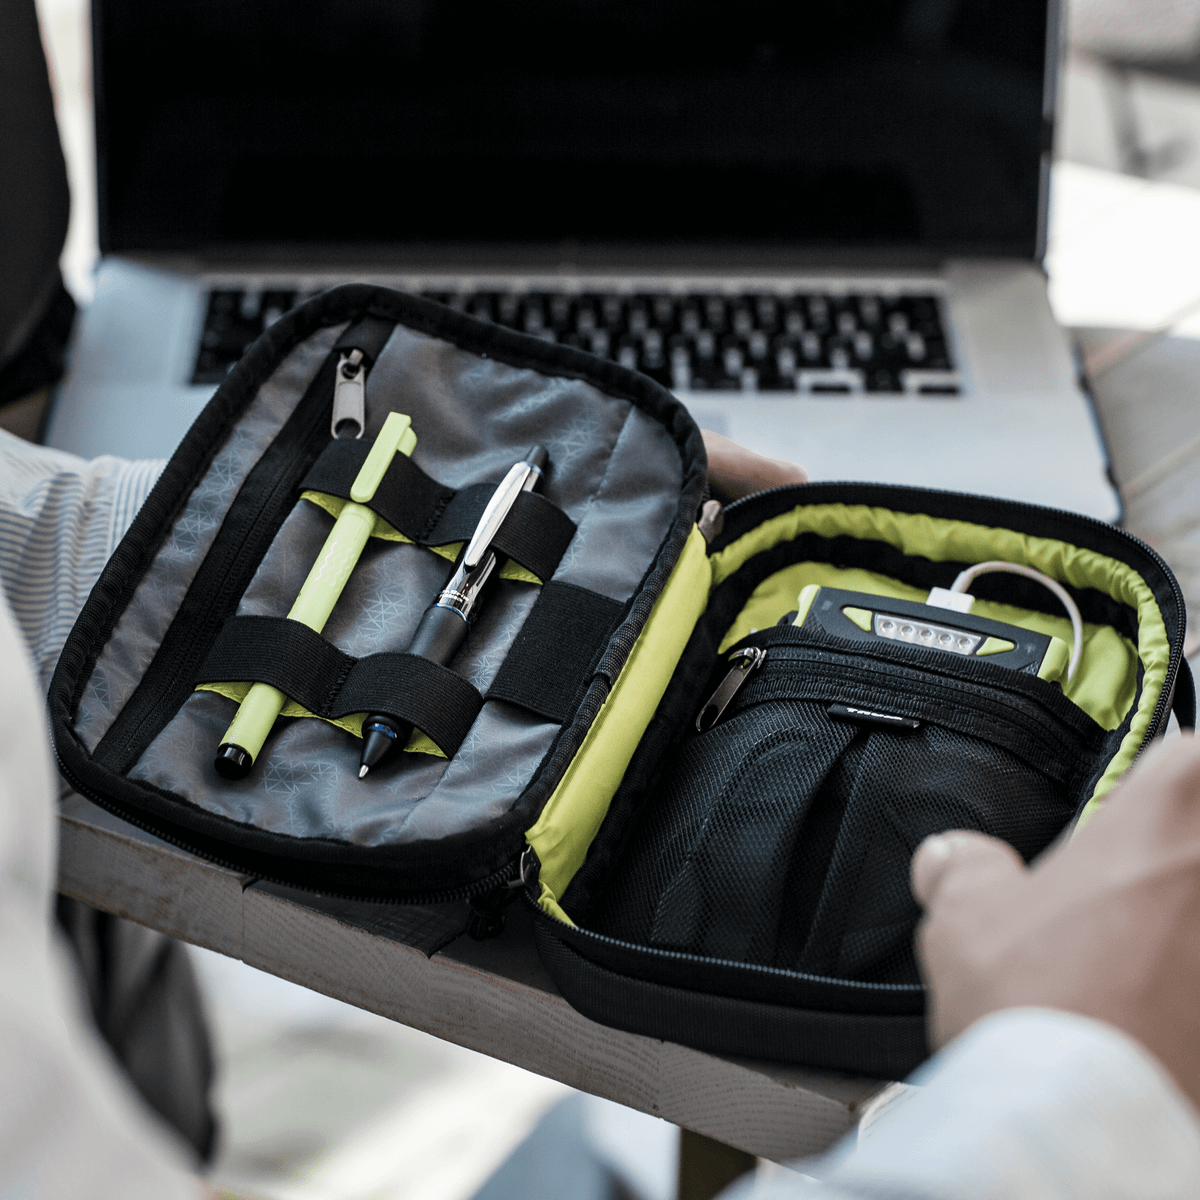 A close-up of a laptop and Thule Subterra PowerShuttle electronics organizer with battery and pens.